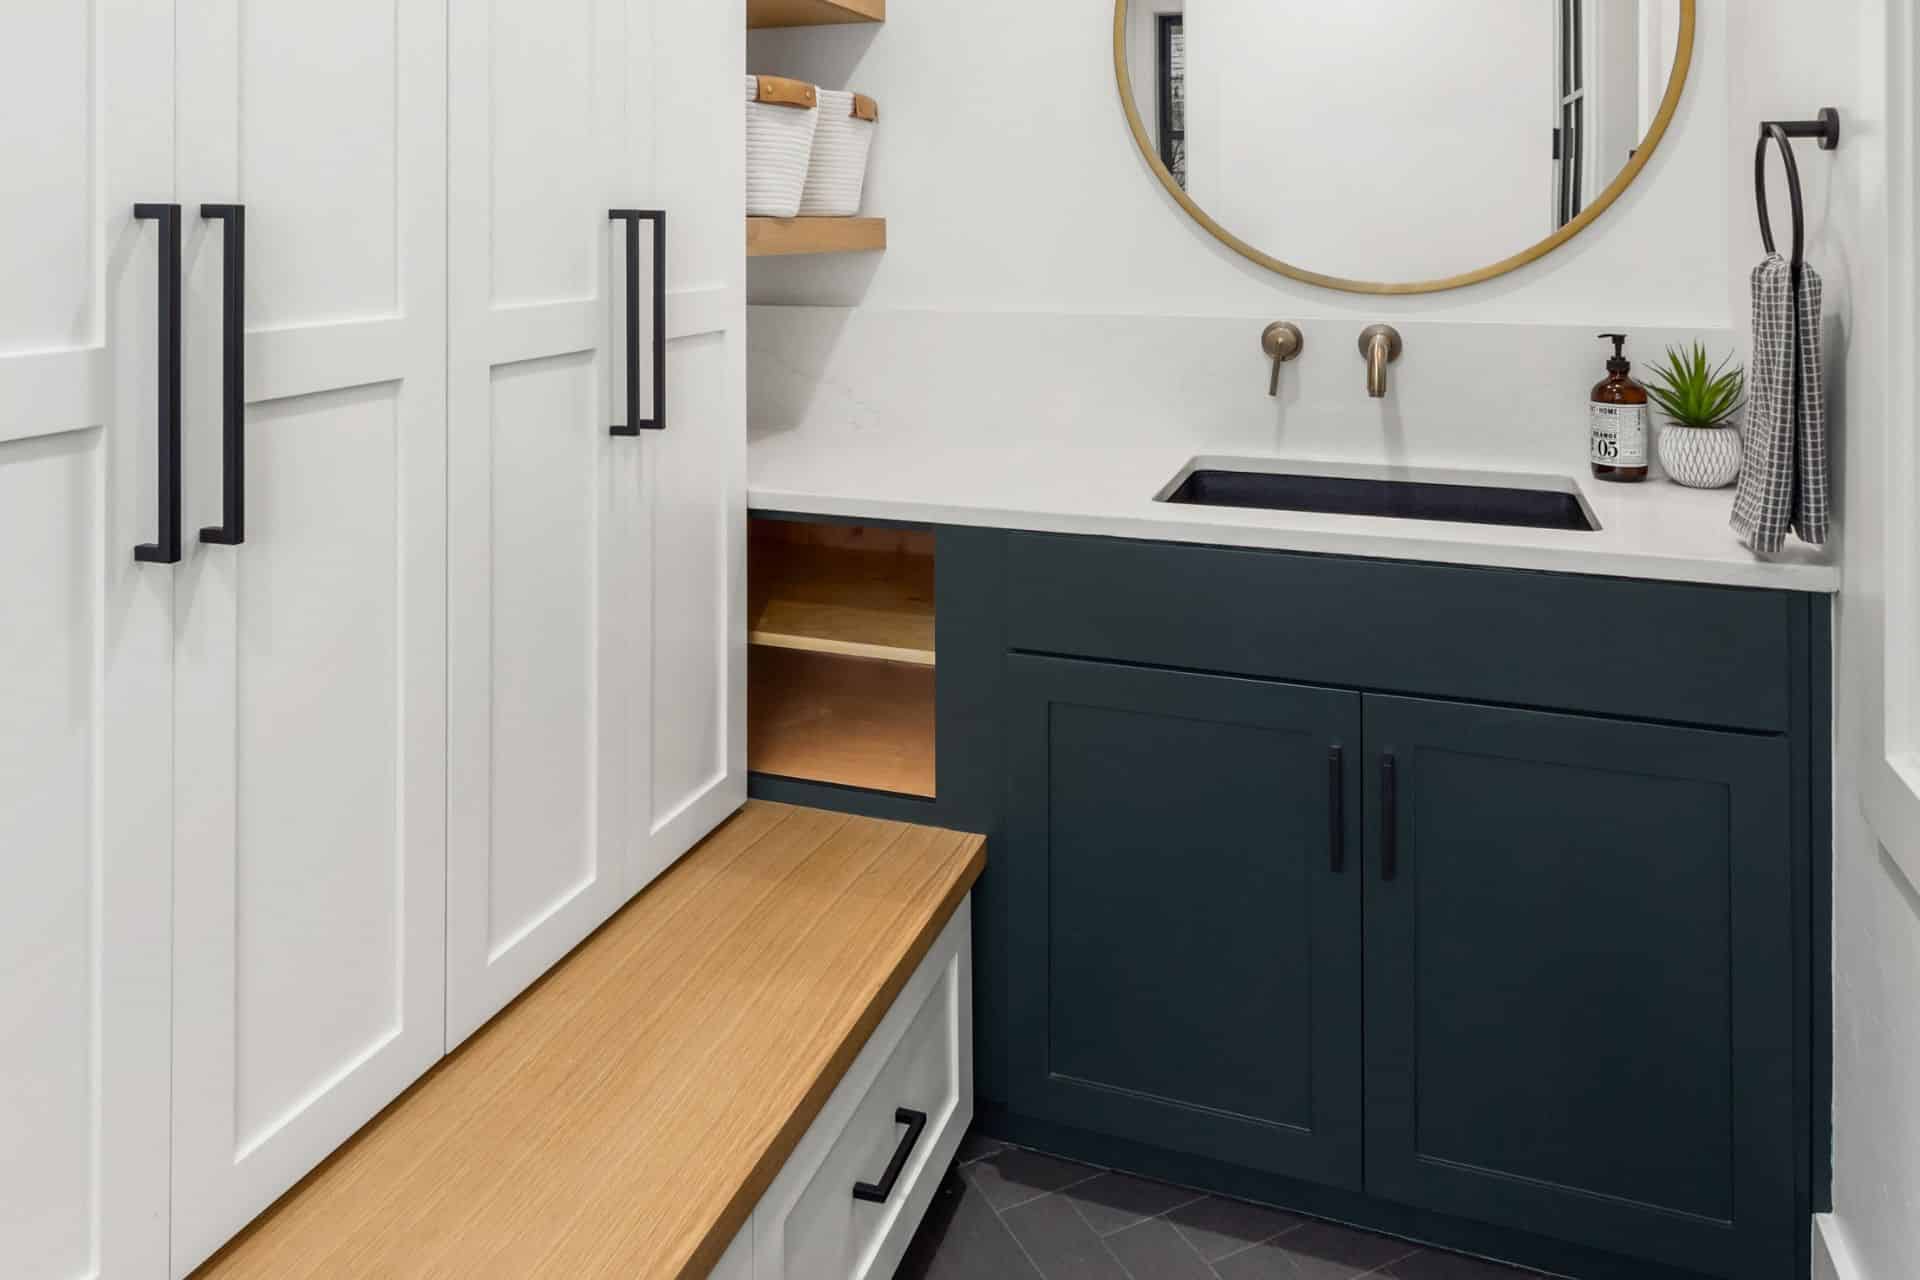 mudroom cabinets with doors